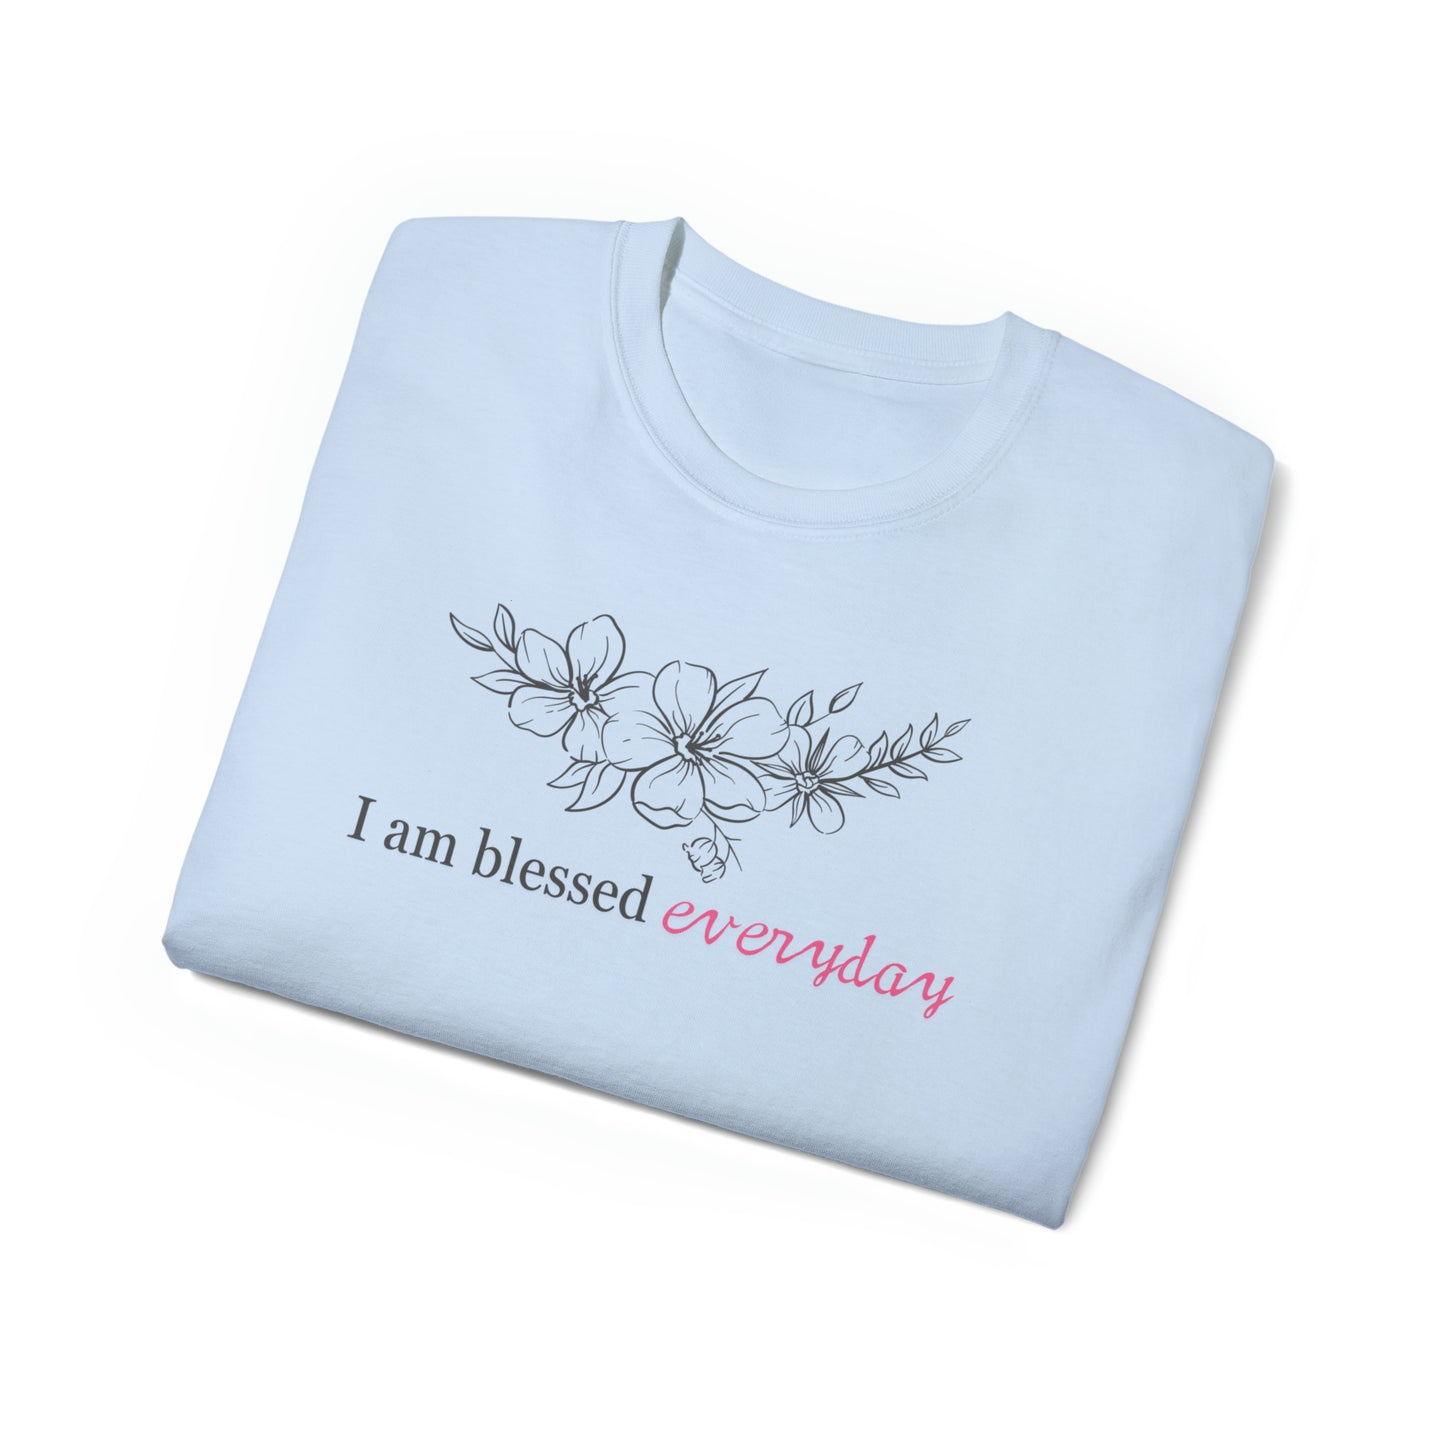 Unisex Ultra Cotton Tee - I am blessed everyday